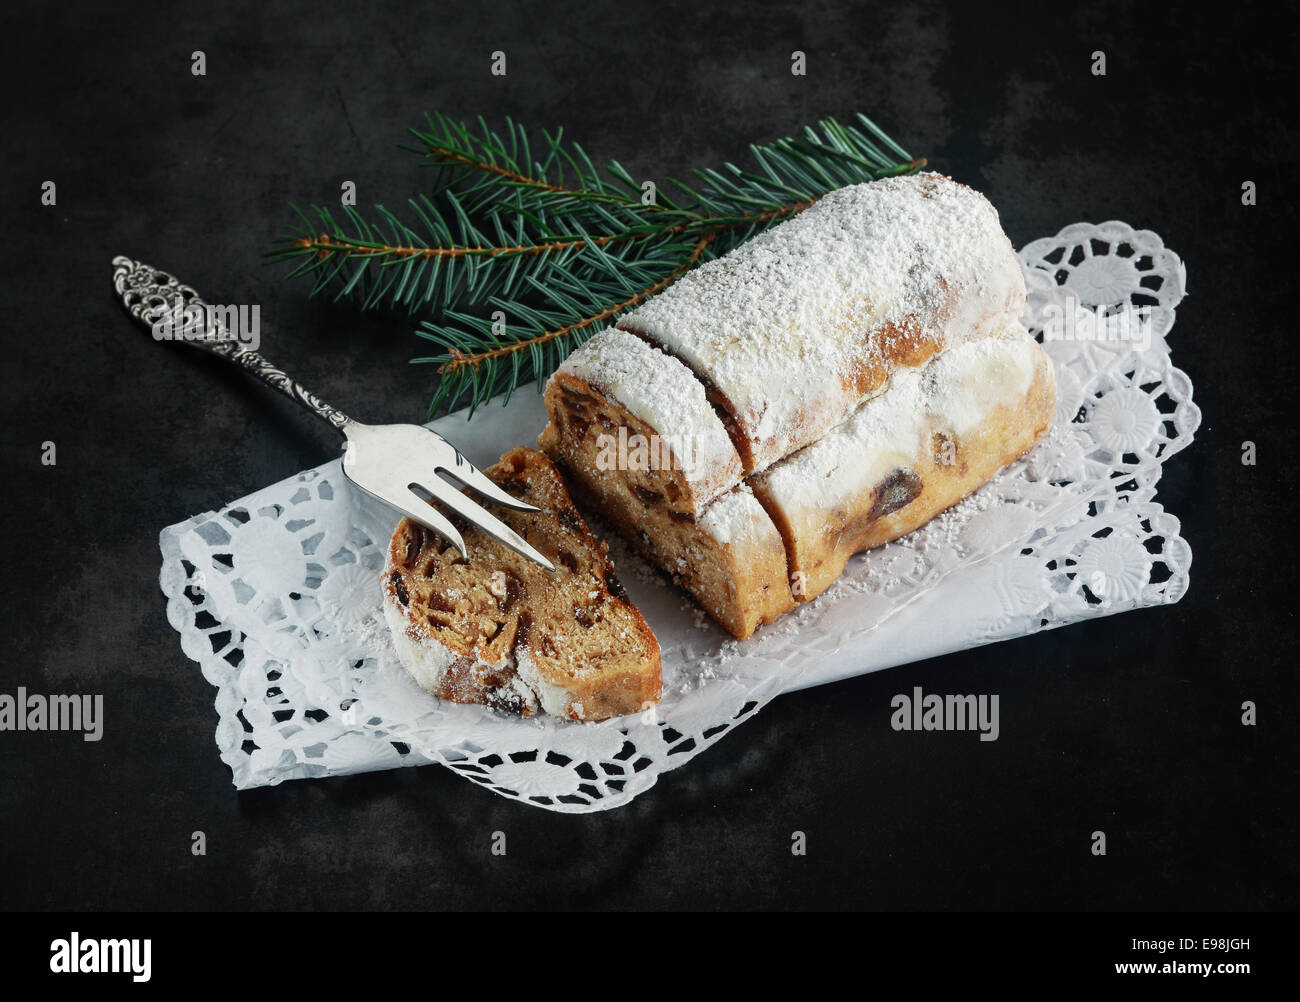 Christmas fare with a high angle view of a loaf of panettone bread, a speciality sweet bread made with spices and topped with powdered sugar for the festive season Stock Photo